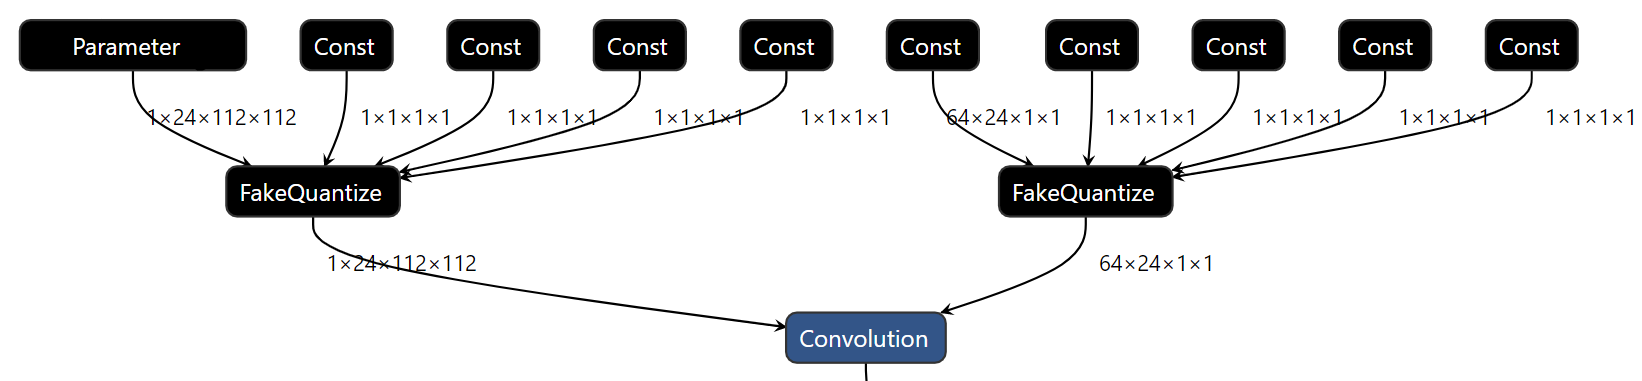 expanded_int8_Convolution_weights.png